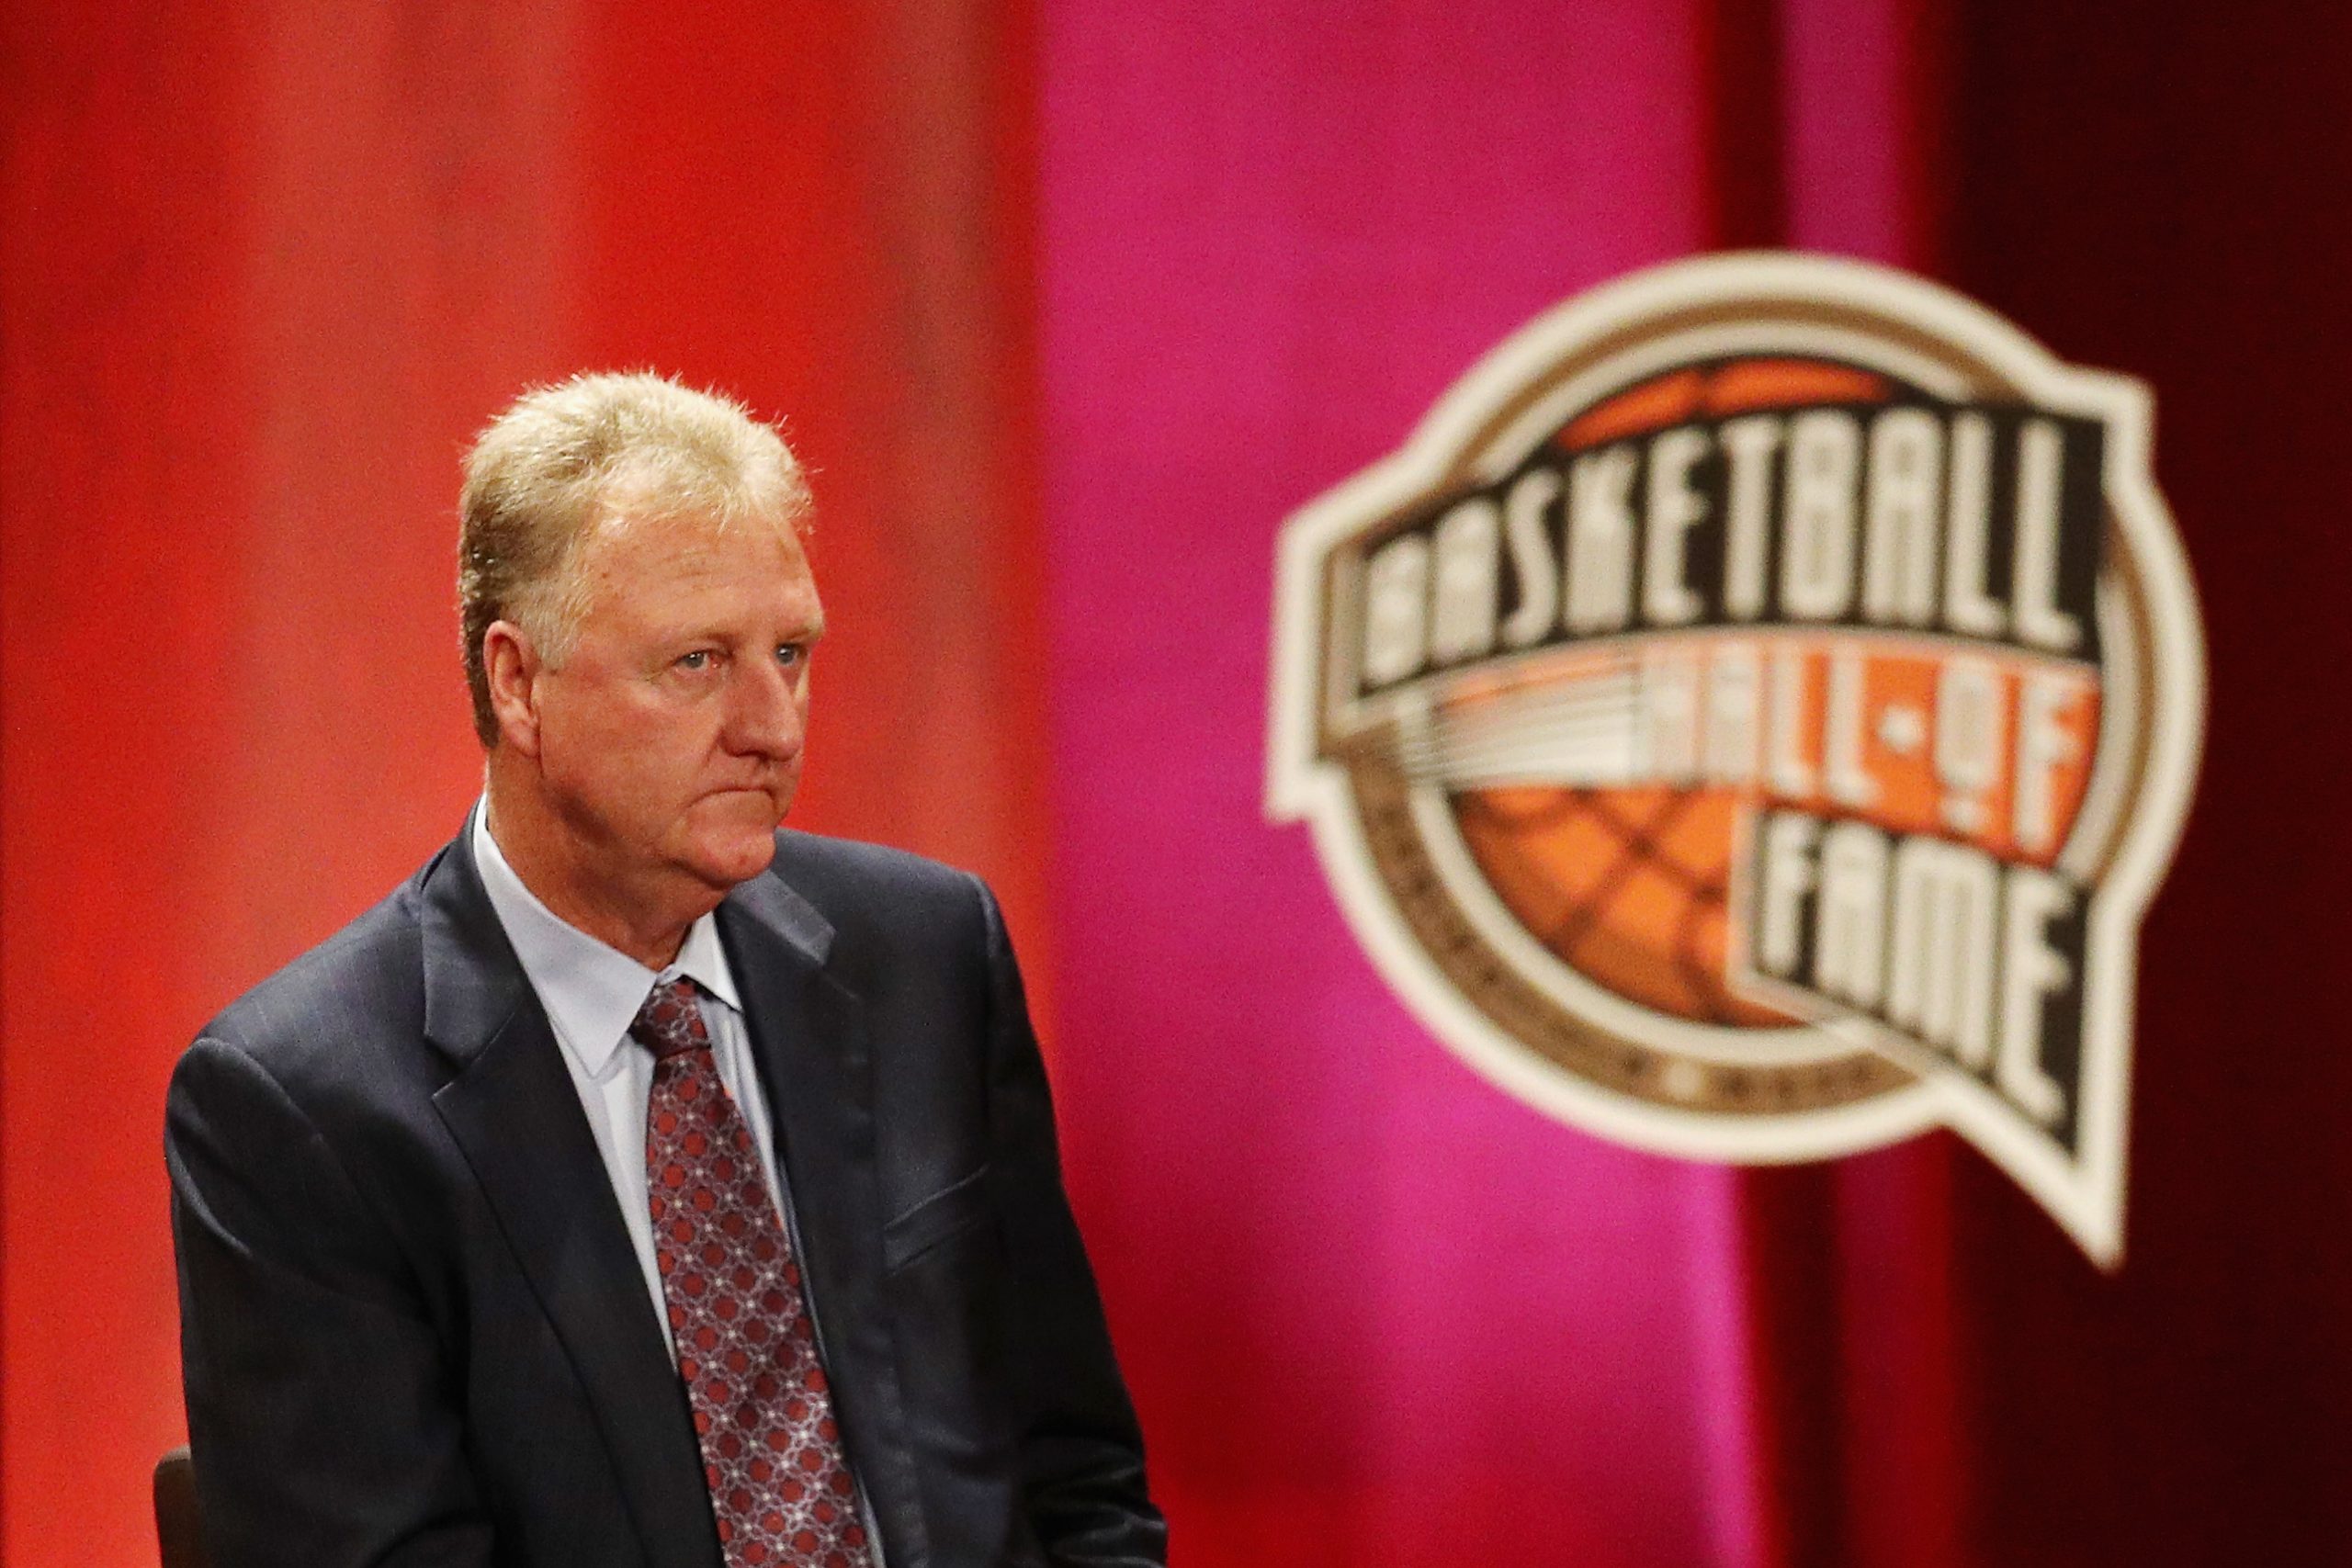 Larry Bird looks on during the 2018 Basketball Hall of Fame Enshrinement Ceremony.